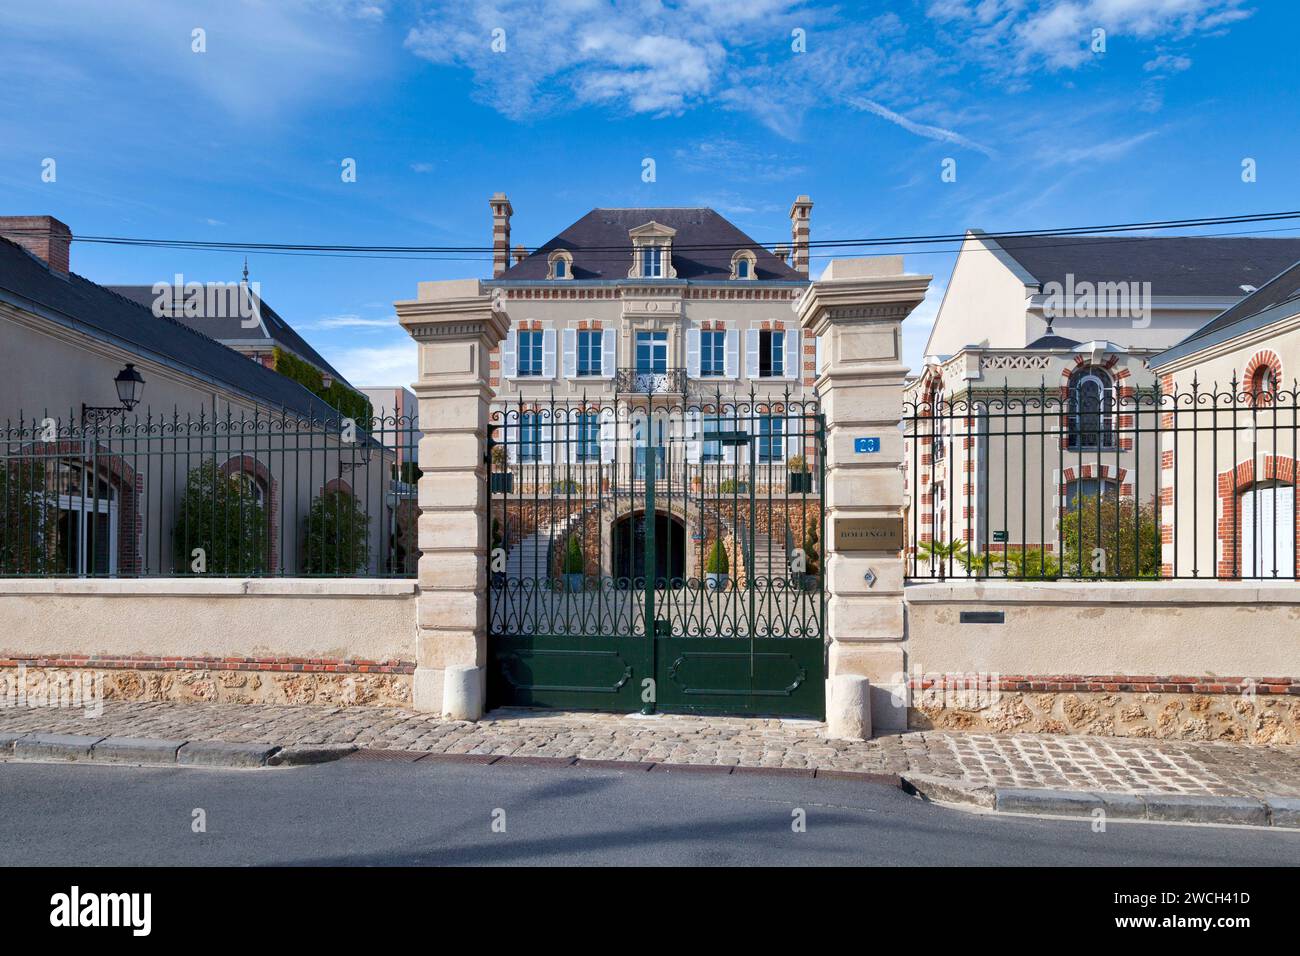 Aÿ, France - July 23 2020: The Champagne house Bollinger was founded in 1829. Its a family business that remained independent to this days. Stock Photo